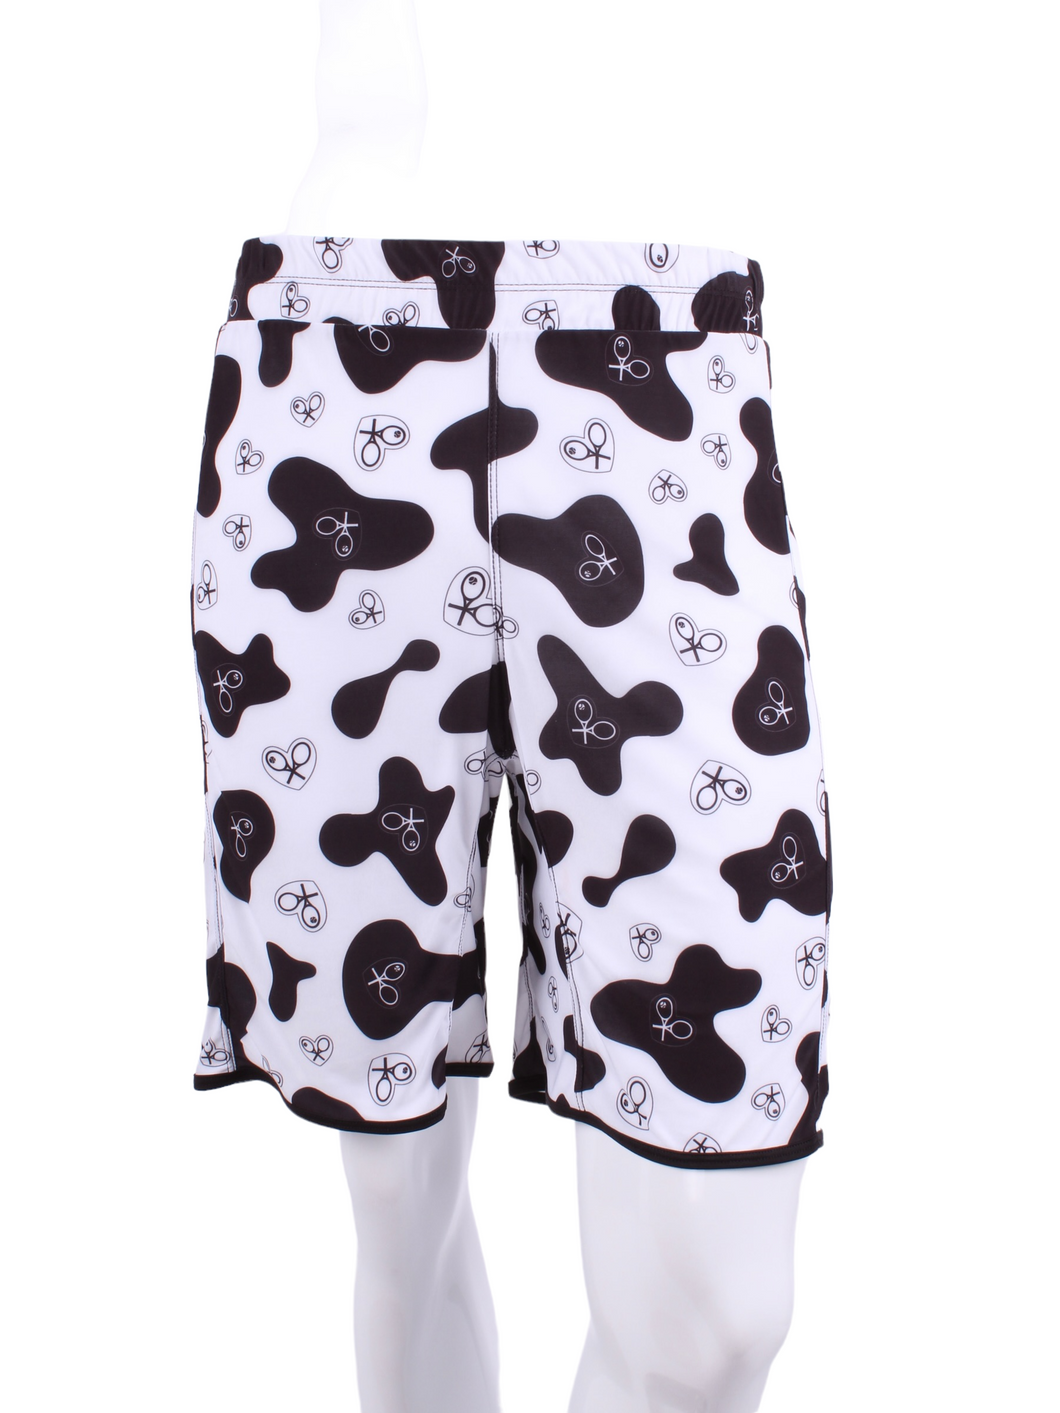 This is our limited edition Short Men’s Shorts in Cow Print.  This piece has a silky and soft fabric.   We make these in very small quantities - by design.  Unique.  Luxurious.  Comfortable.  Cool.  Fun.